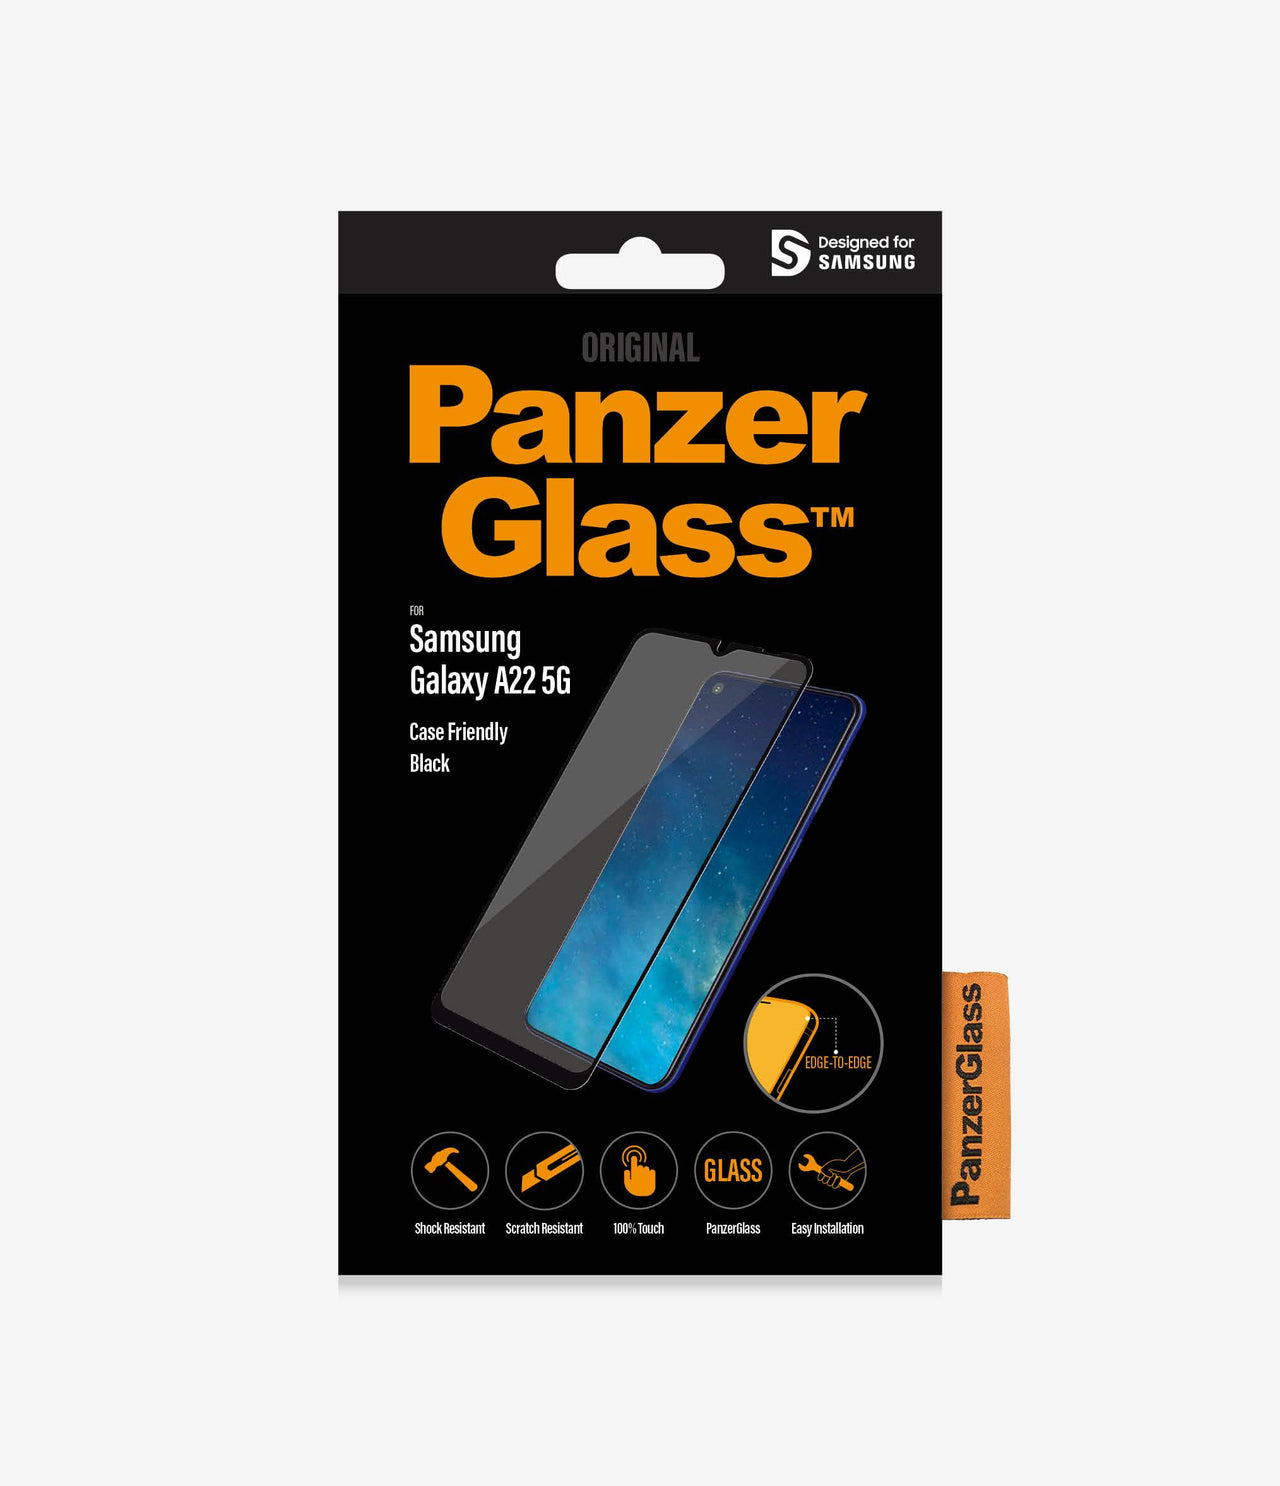 Panzer Glass Screen Protector for Samsung Galaxy A22 5G - Black